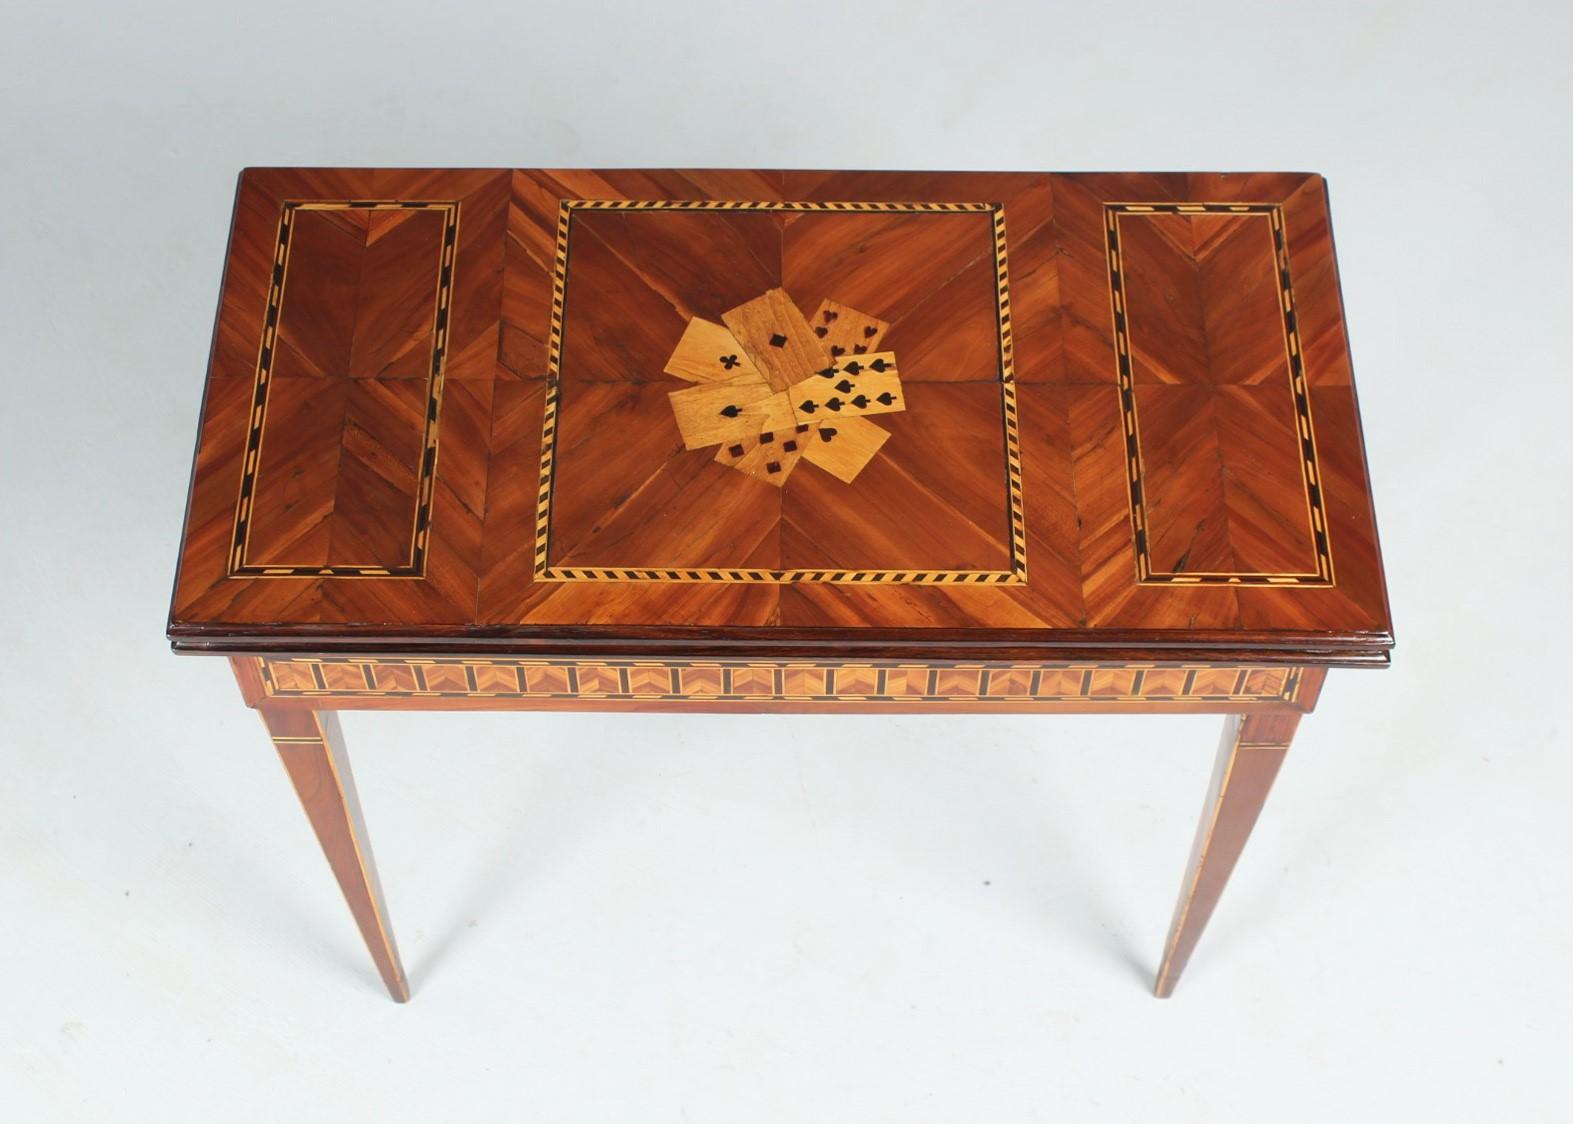 German Louis XVI Game Table with Marquetry, circa 1800